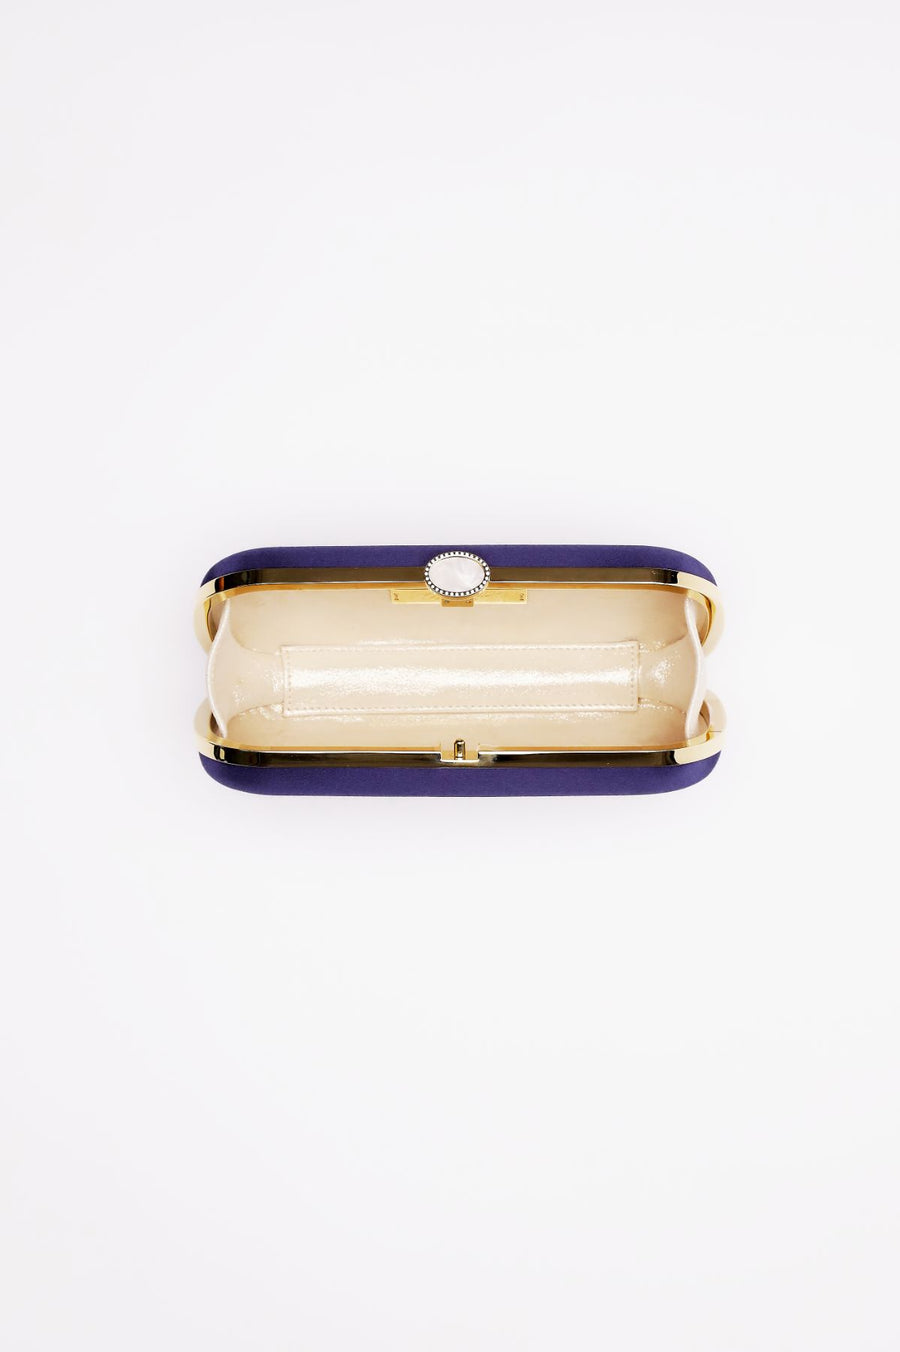 Top open view of Bella Clutch in Navy Blue satin with silver hardware frame.